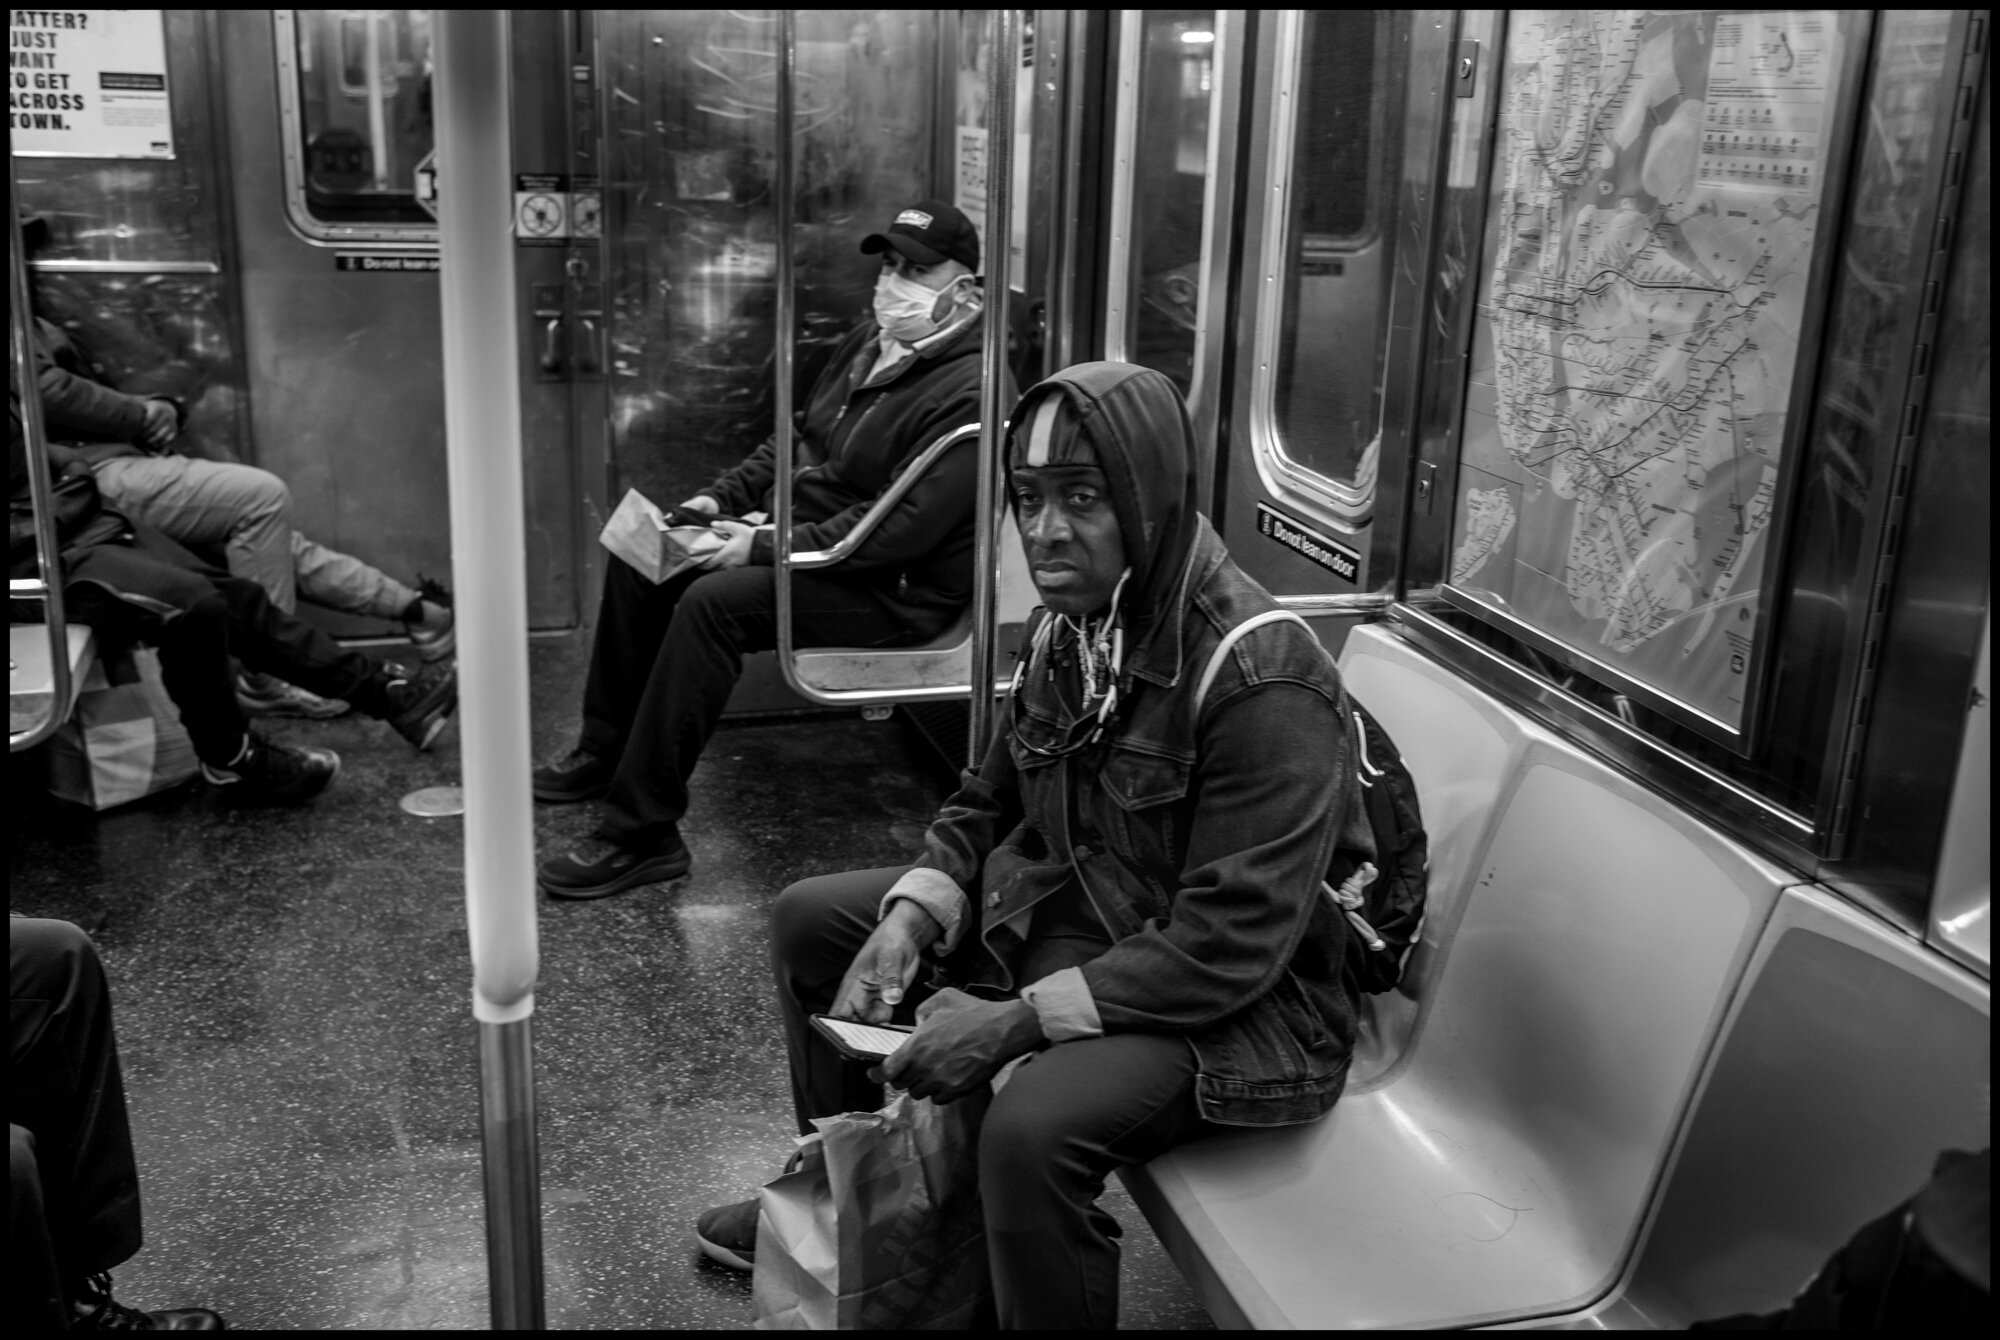  While riding the train north on the 1 Line, I encountered people wearing masks am some not. Looks of anxiety seemed to abound.  March 21, 2020. © Peter Turnley.  ID# 01-015 